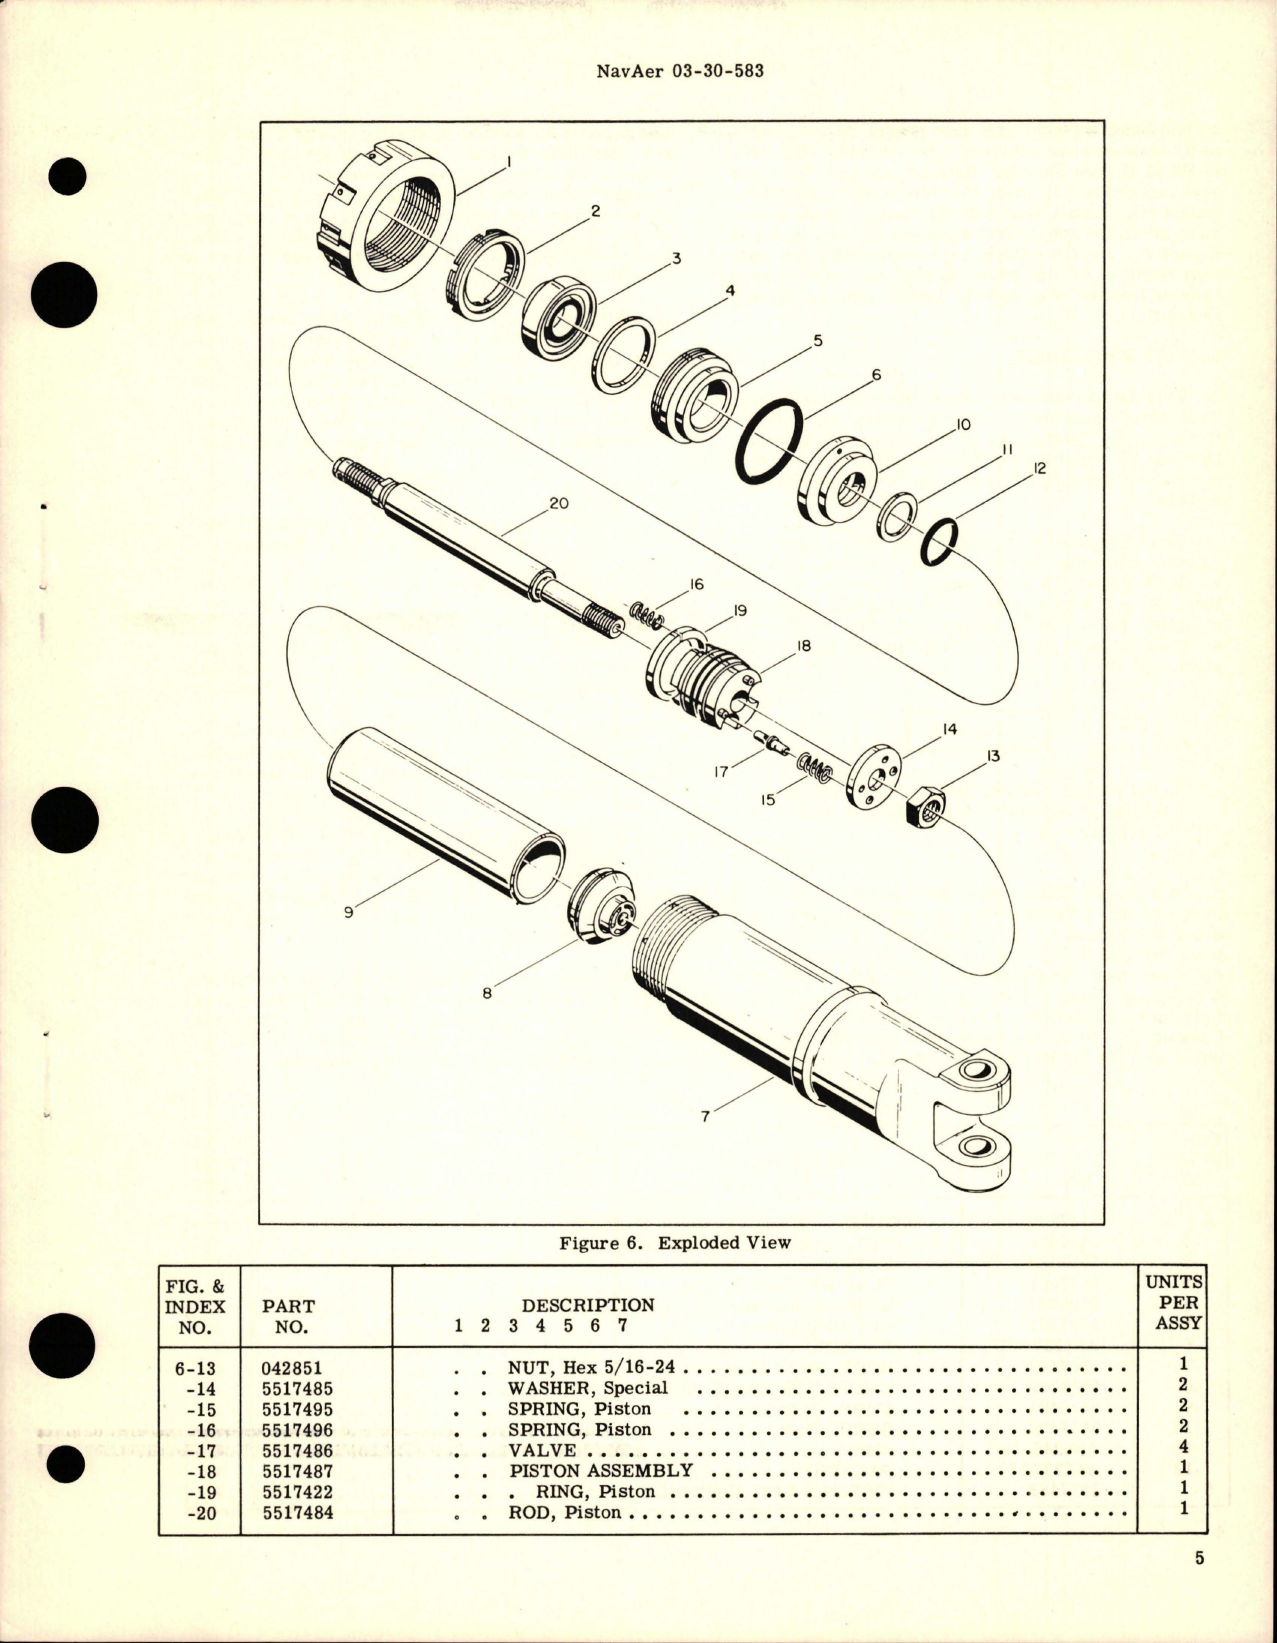 Sample page 5 from AirCorps Library document: Overhaul Instructions with Parts Breakdown for Rotor Blade Lag Damper Assembly - 5517100